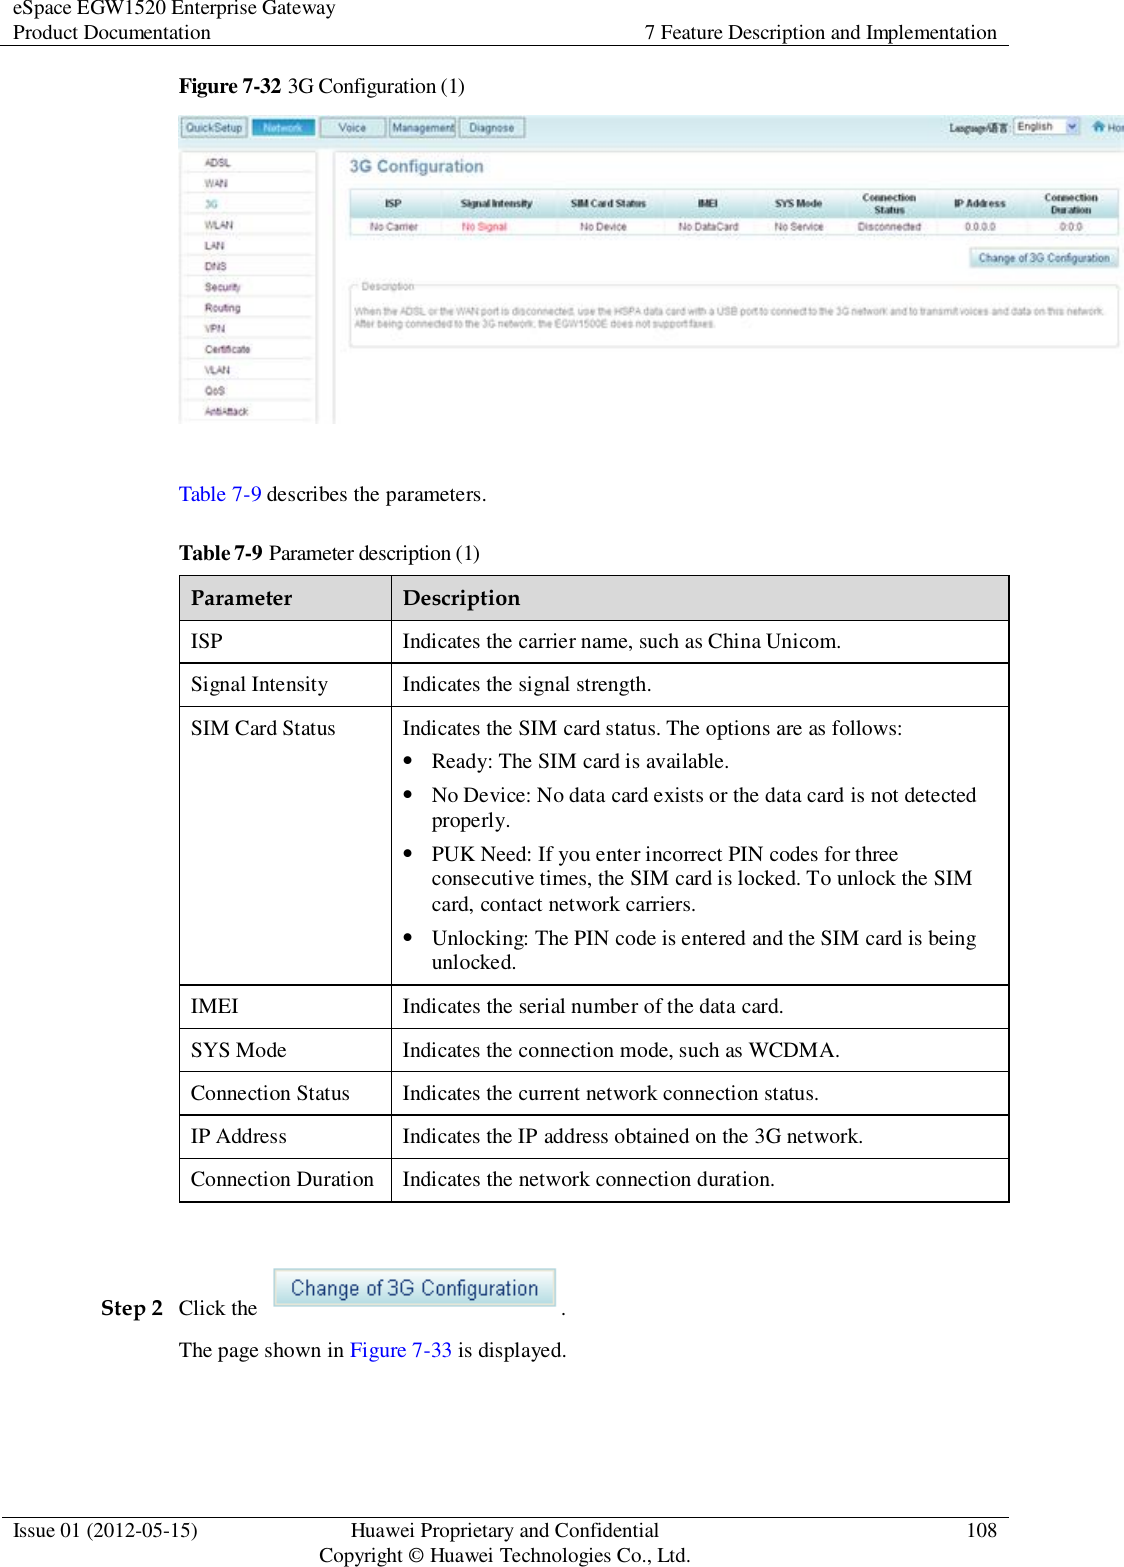 eSpace EGW1520 Enterprise Gateway Product Documentation 7 Feature Description and Implementation  Issue 01 (2012-05-15) Huawei Proprietary and Confidential                                     Copyright © Huawei Technologies Co., Ltd. 108  Figure 7-32 3G Configuration (1)   Table 7-9 describes the parameters. Table 7-9 Parameter description (1) Parameter Description ISP Indicates the carrier name, such as China Unicom. Signal Intensity Indicates the signal strength. SIM Card Status Indicates the SIM card status. The options are as follows:  Ready: The SIM card is available.  No Device: No data card exists or the data card is not detected properly.  PUK Need: If you enter incorrect PIN codes for three consecutive times, the SIM card is locked. To unlock the SIM card, contact network carriers.  Unlocking: The PIN code is entered and the SIM card is being unlocked. IMEI Indicates the serial number of the data card. SYS Mode Indicates the connection mode, such as WCDMA. Connection Status Indicates the current network connection status. IP Address Indicates the IP address obtained on the 3G network. Connection Duration Indicates the network connection duration.  Step 2 Click the  . The page shown in Figure 7-33 is displayed. 